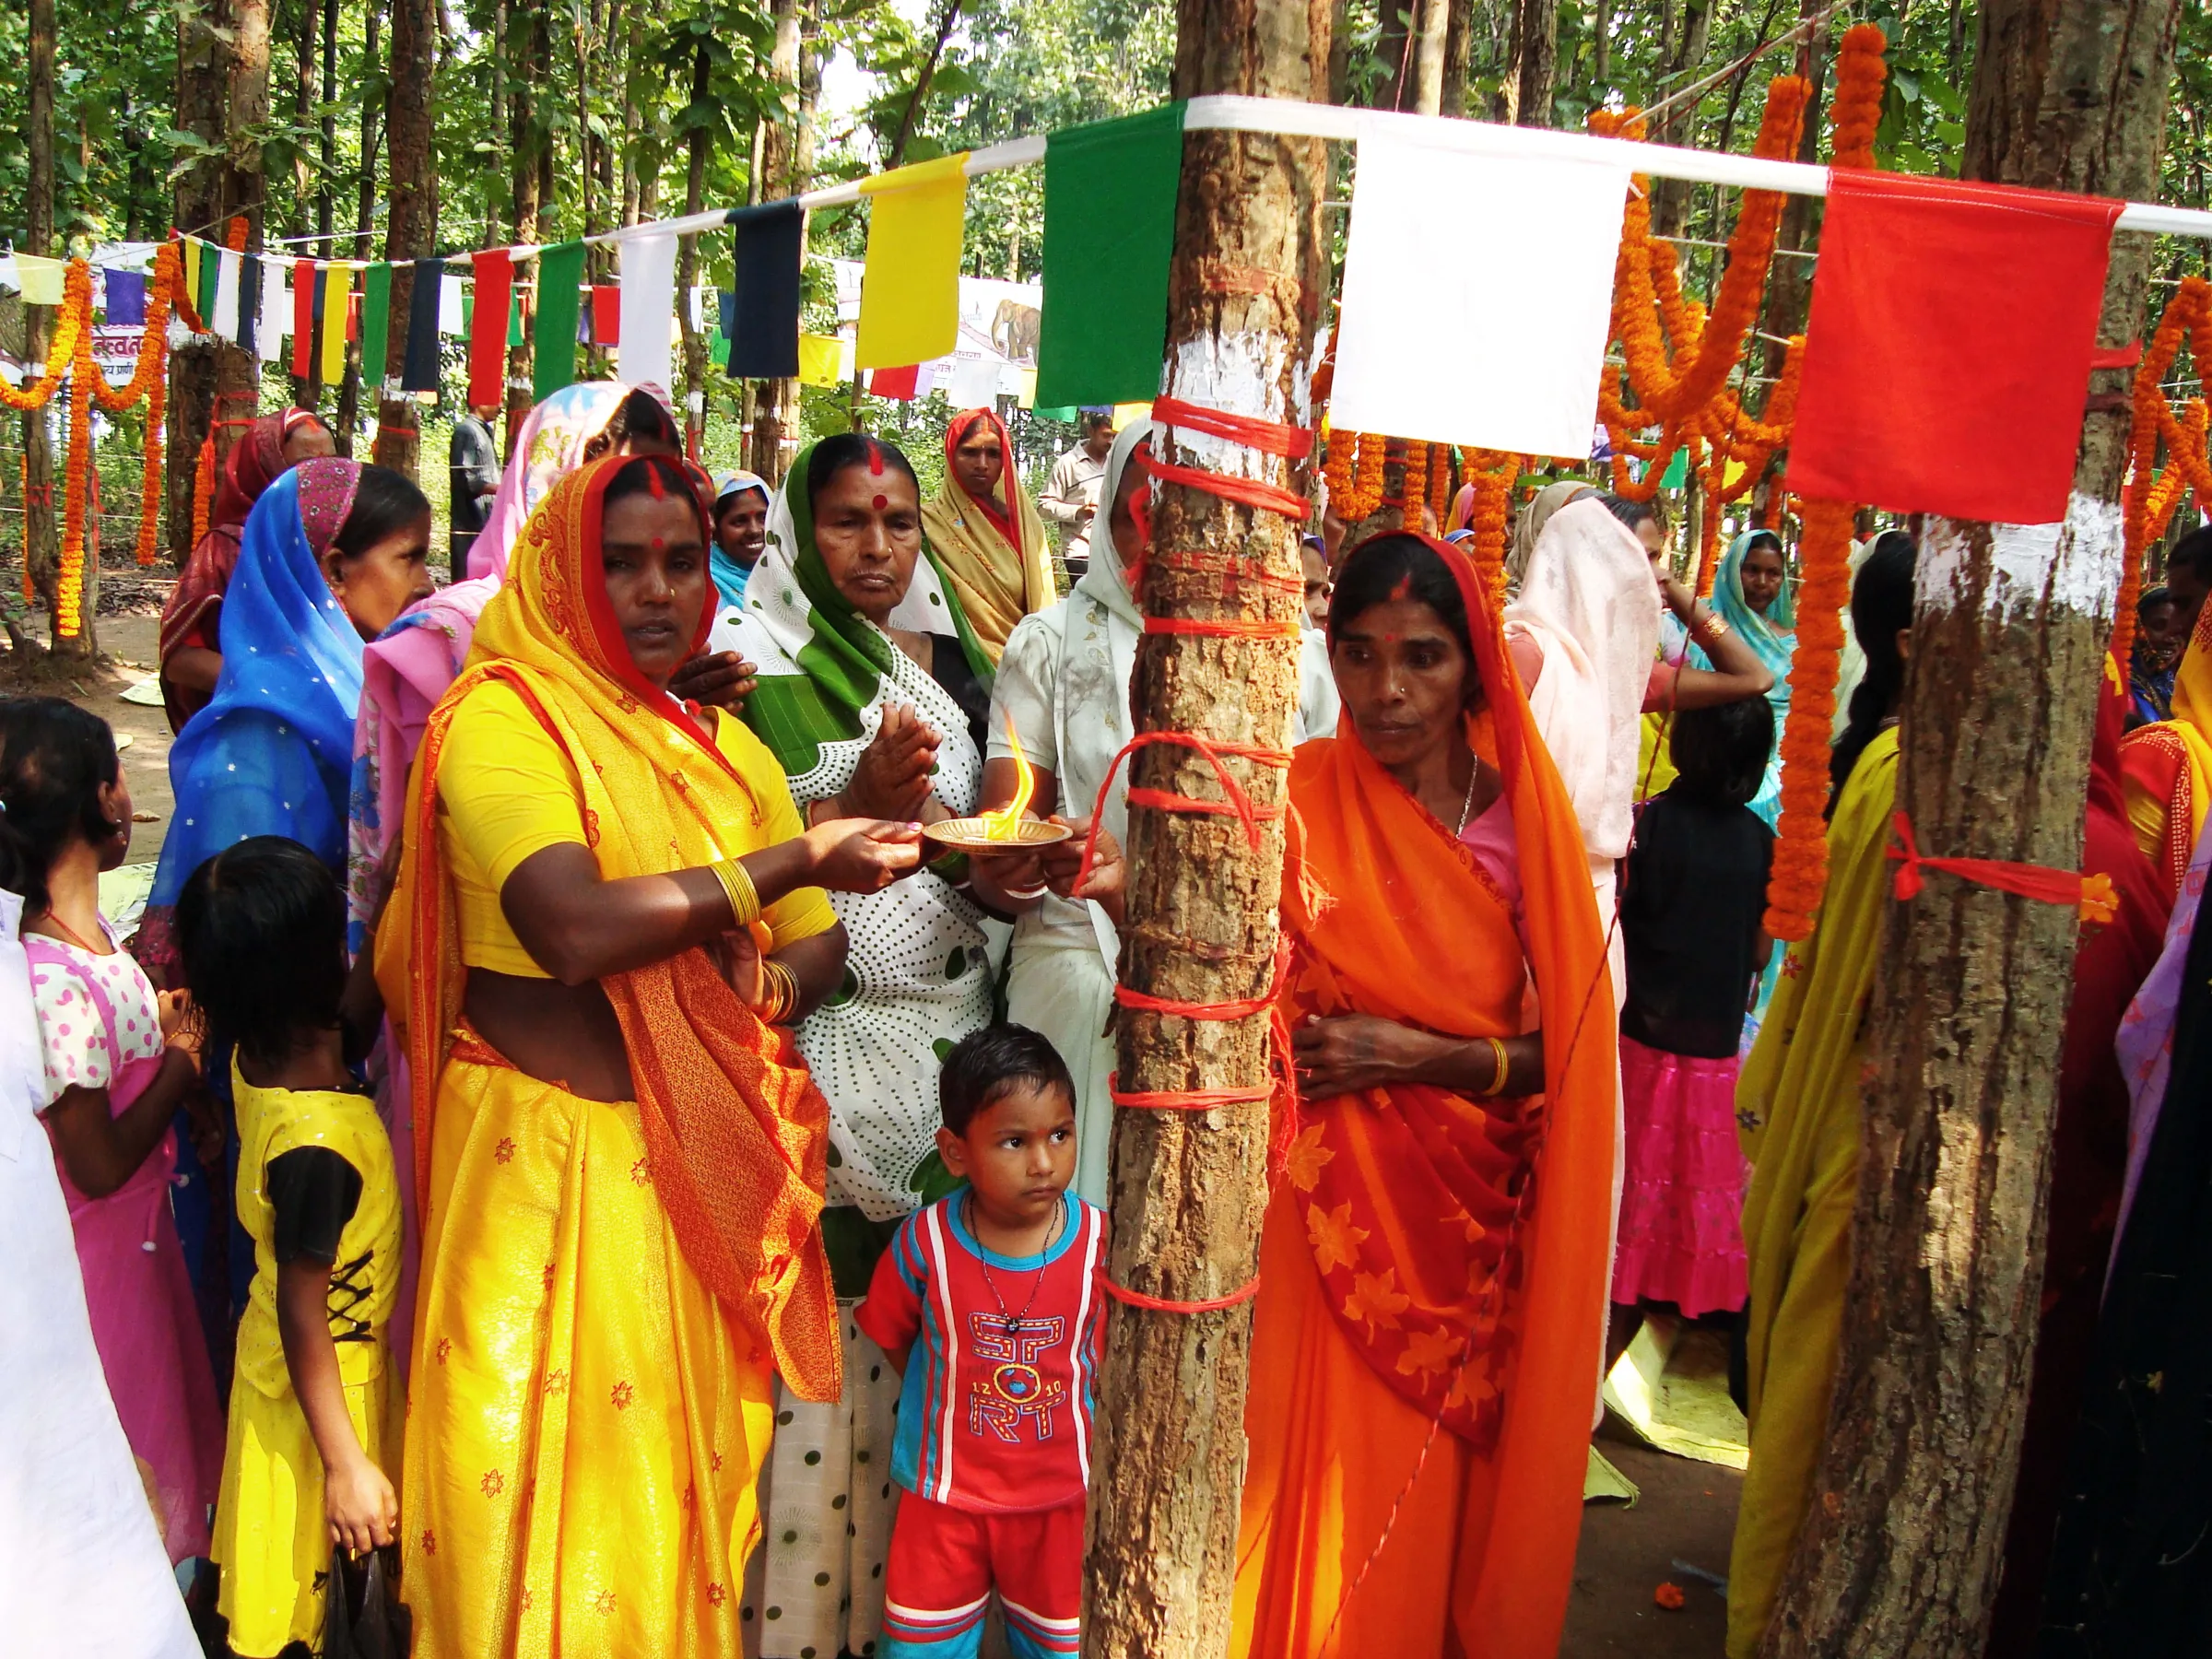 Women consecrate the trees with rituals during an annual festival dedicated to protecting the forest near Dudhmatia village, India, Aug. 23, 2019. Thomson Reuters Foundation / Sanjeev Kumar